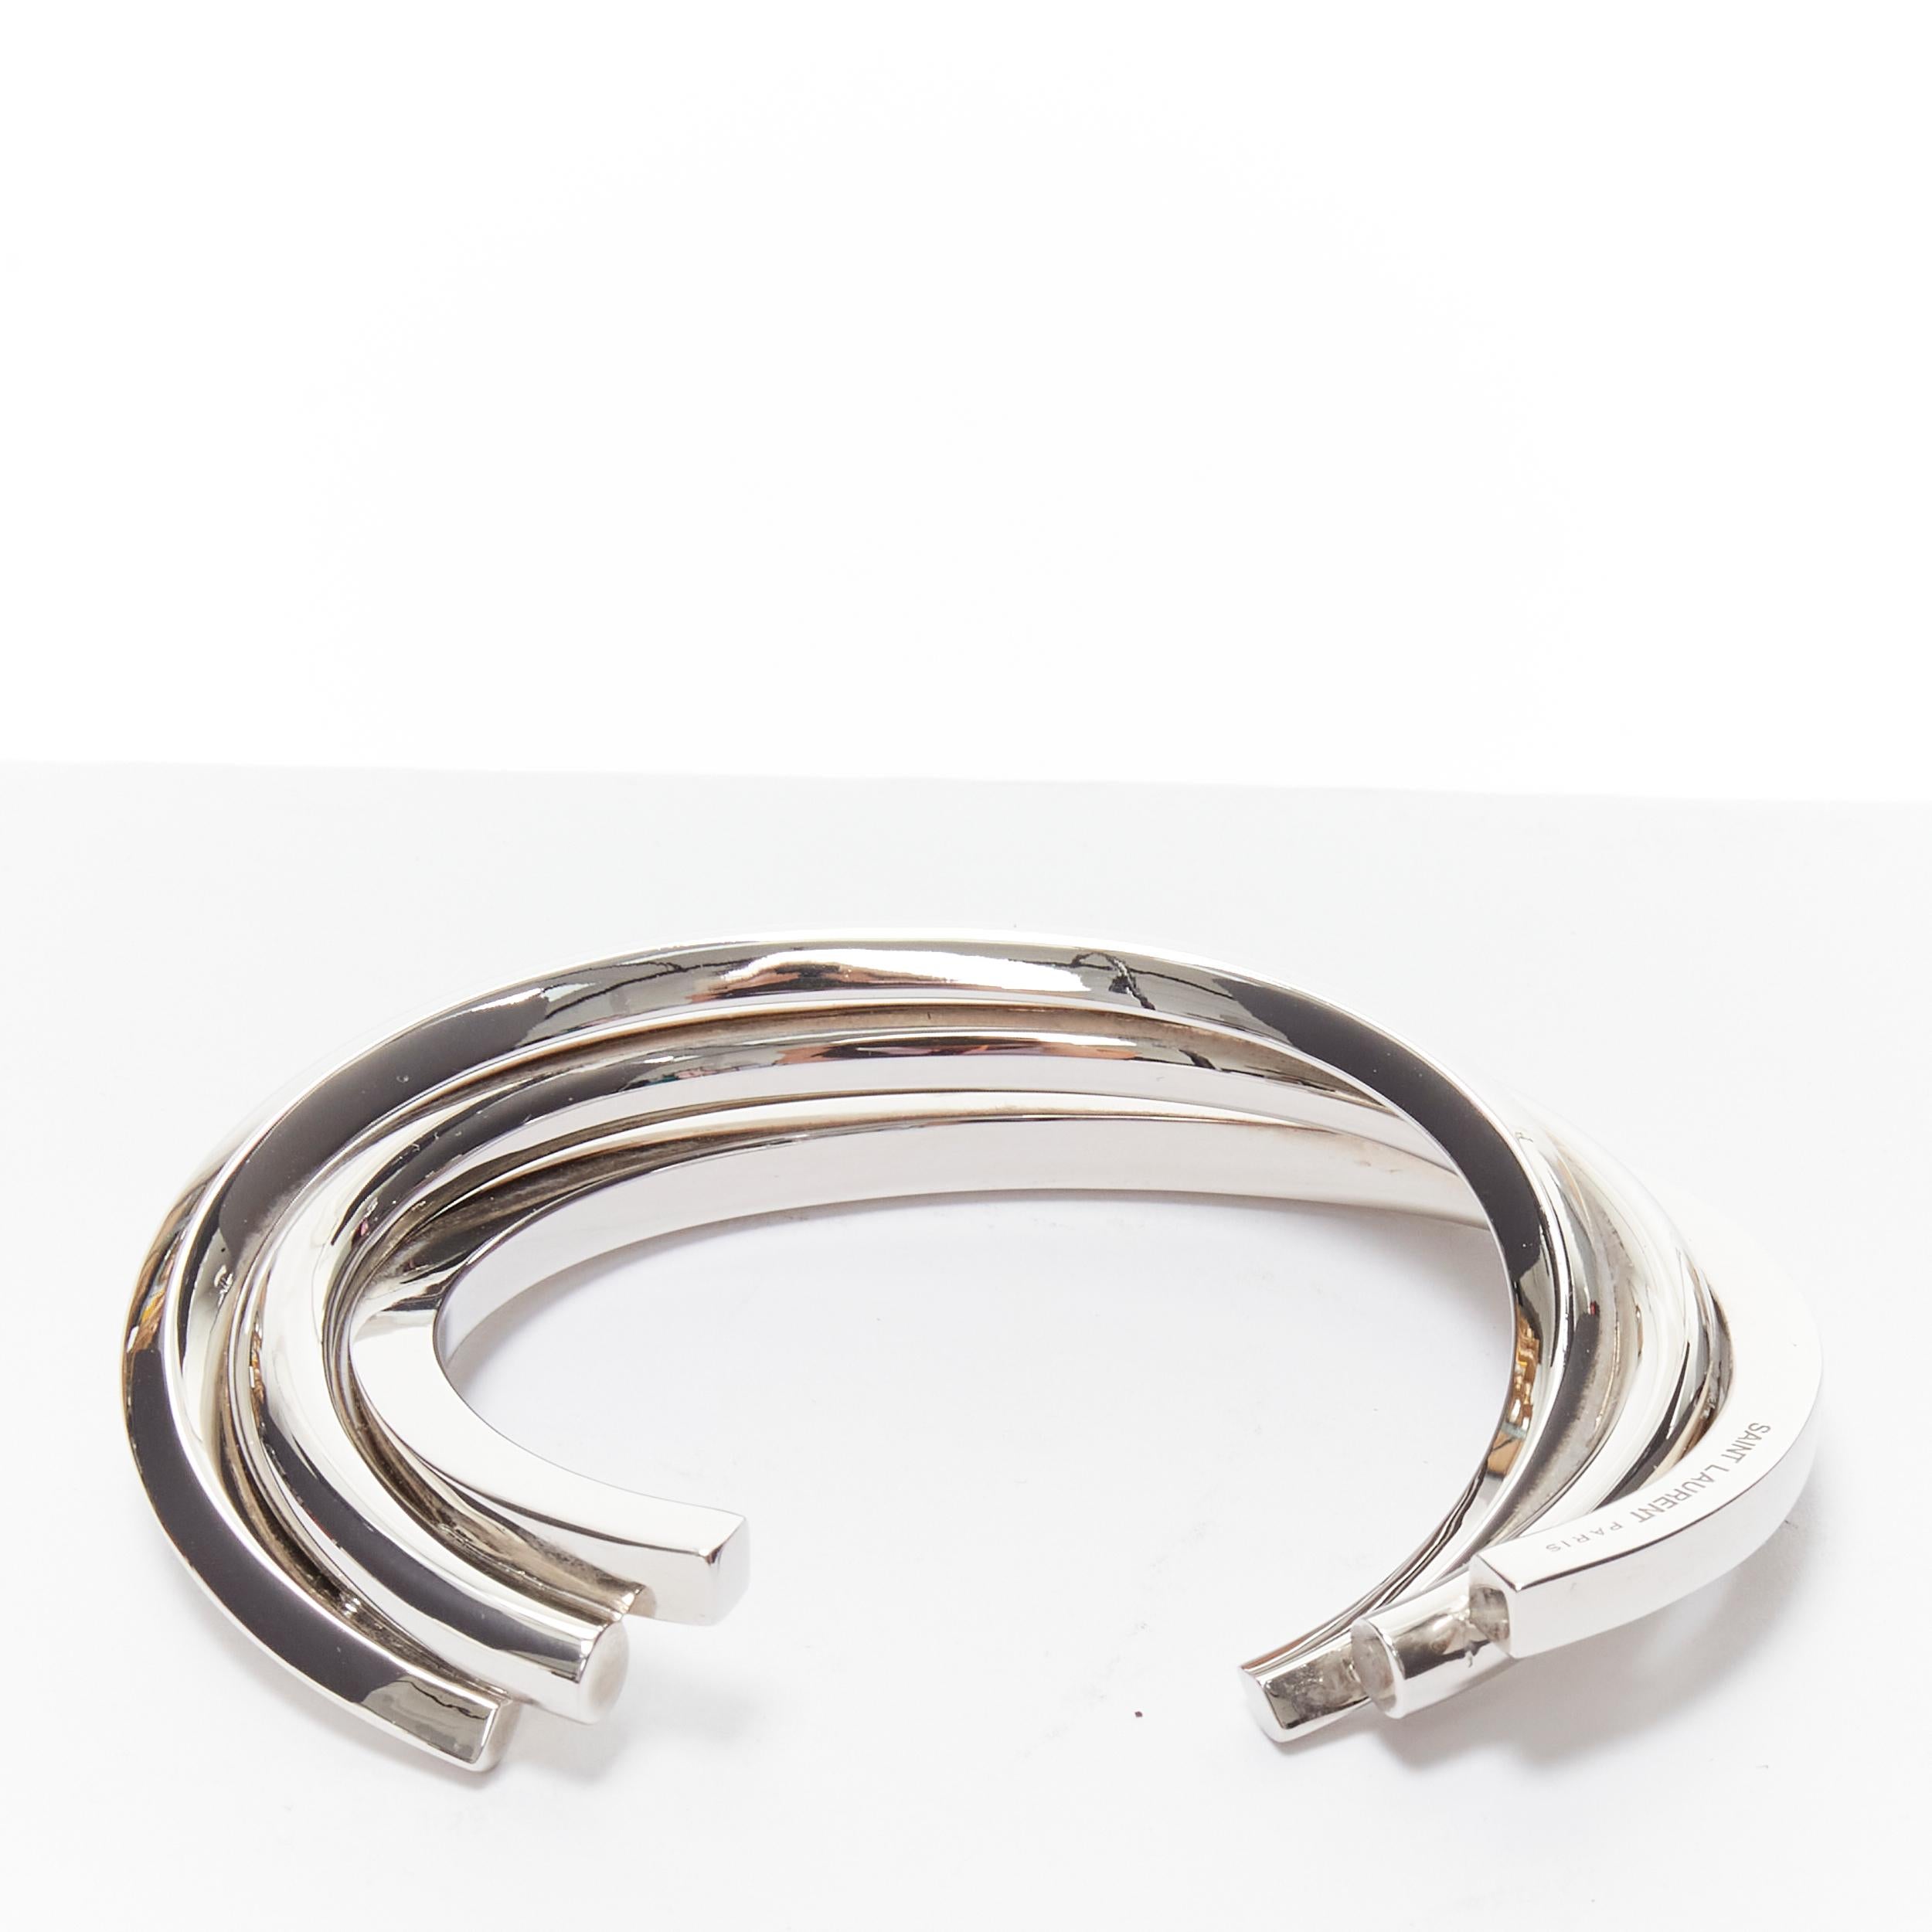 SAINT LAURENT Hedi Slimane silver brass architectural triple twist cuff bracelet 
Reference: TGAS/B01759 
Brand: Saint Laurent 
Designer: Hedi Slimane 
Material: Brass 
Color: Silver 
Pattern: Solid 
Extra Detail: Hedi Slimane for Saint Laurent.